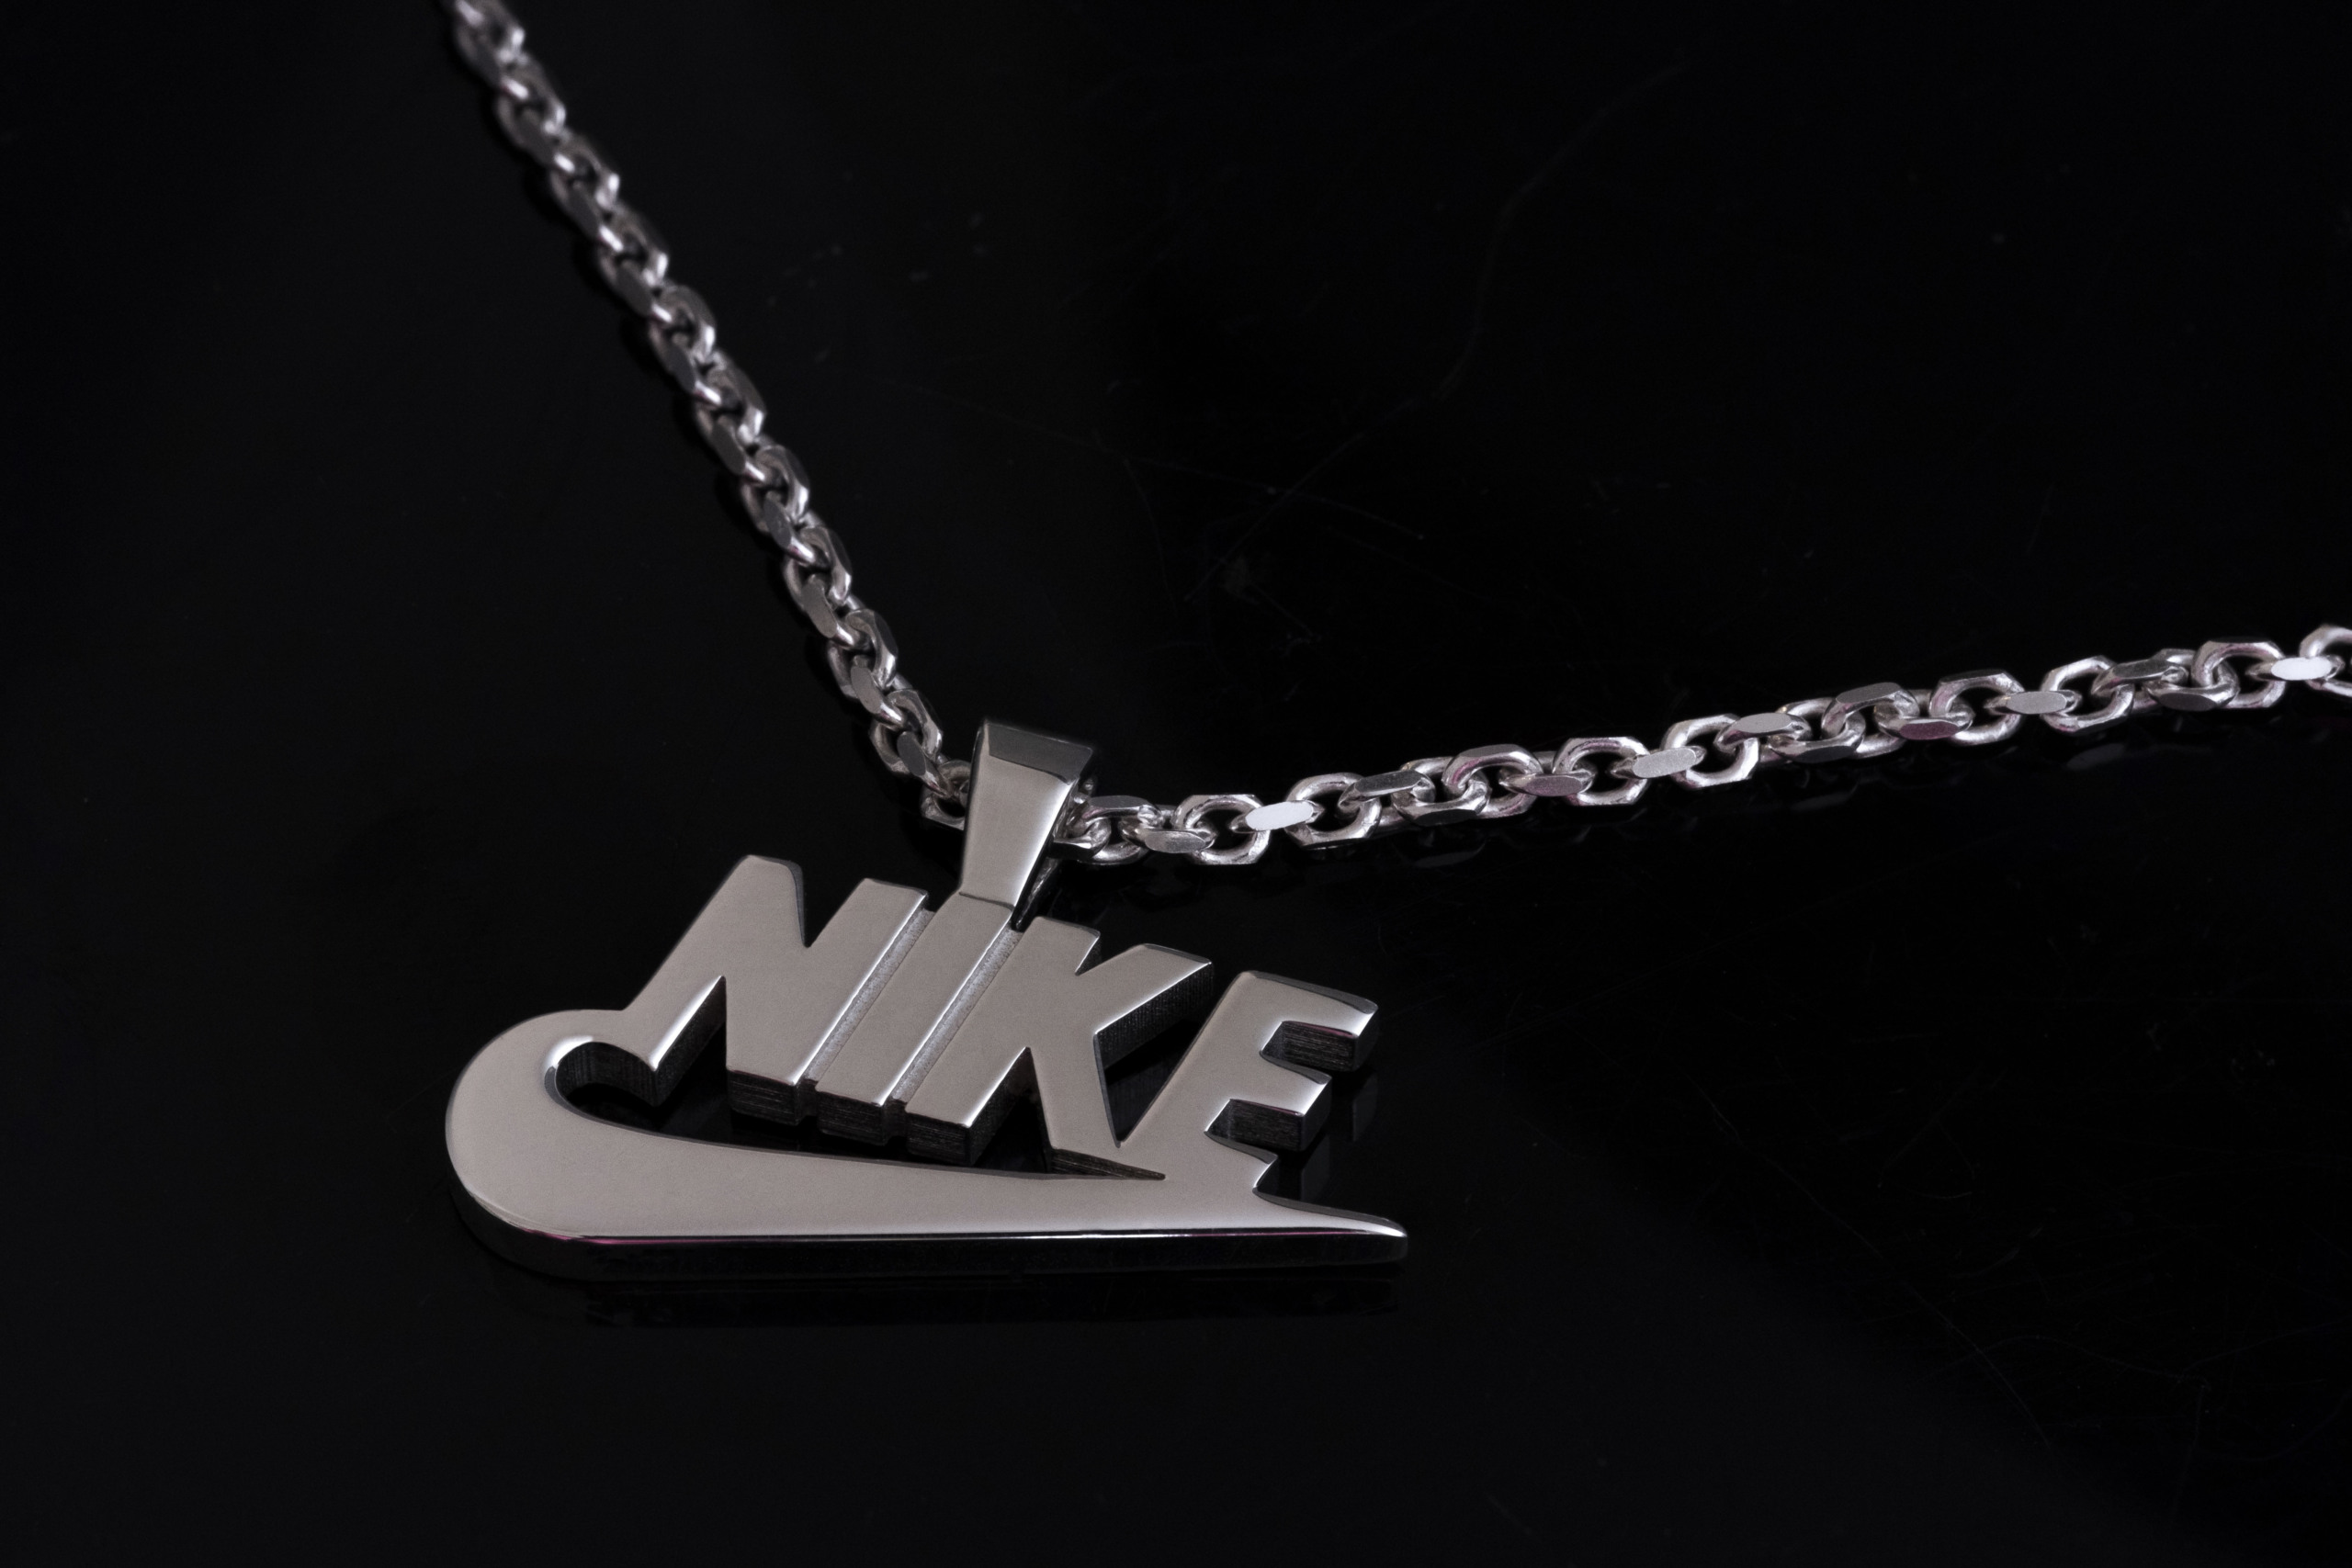 FRONT - custom-made Nike pendant with engraving